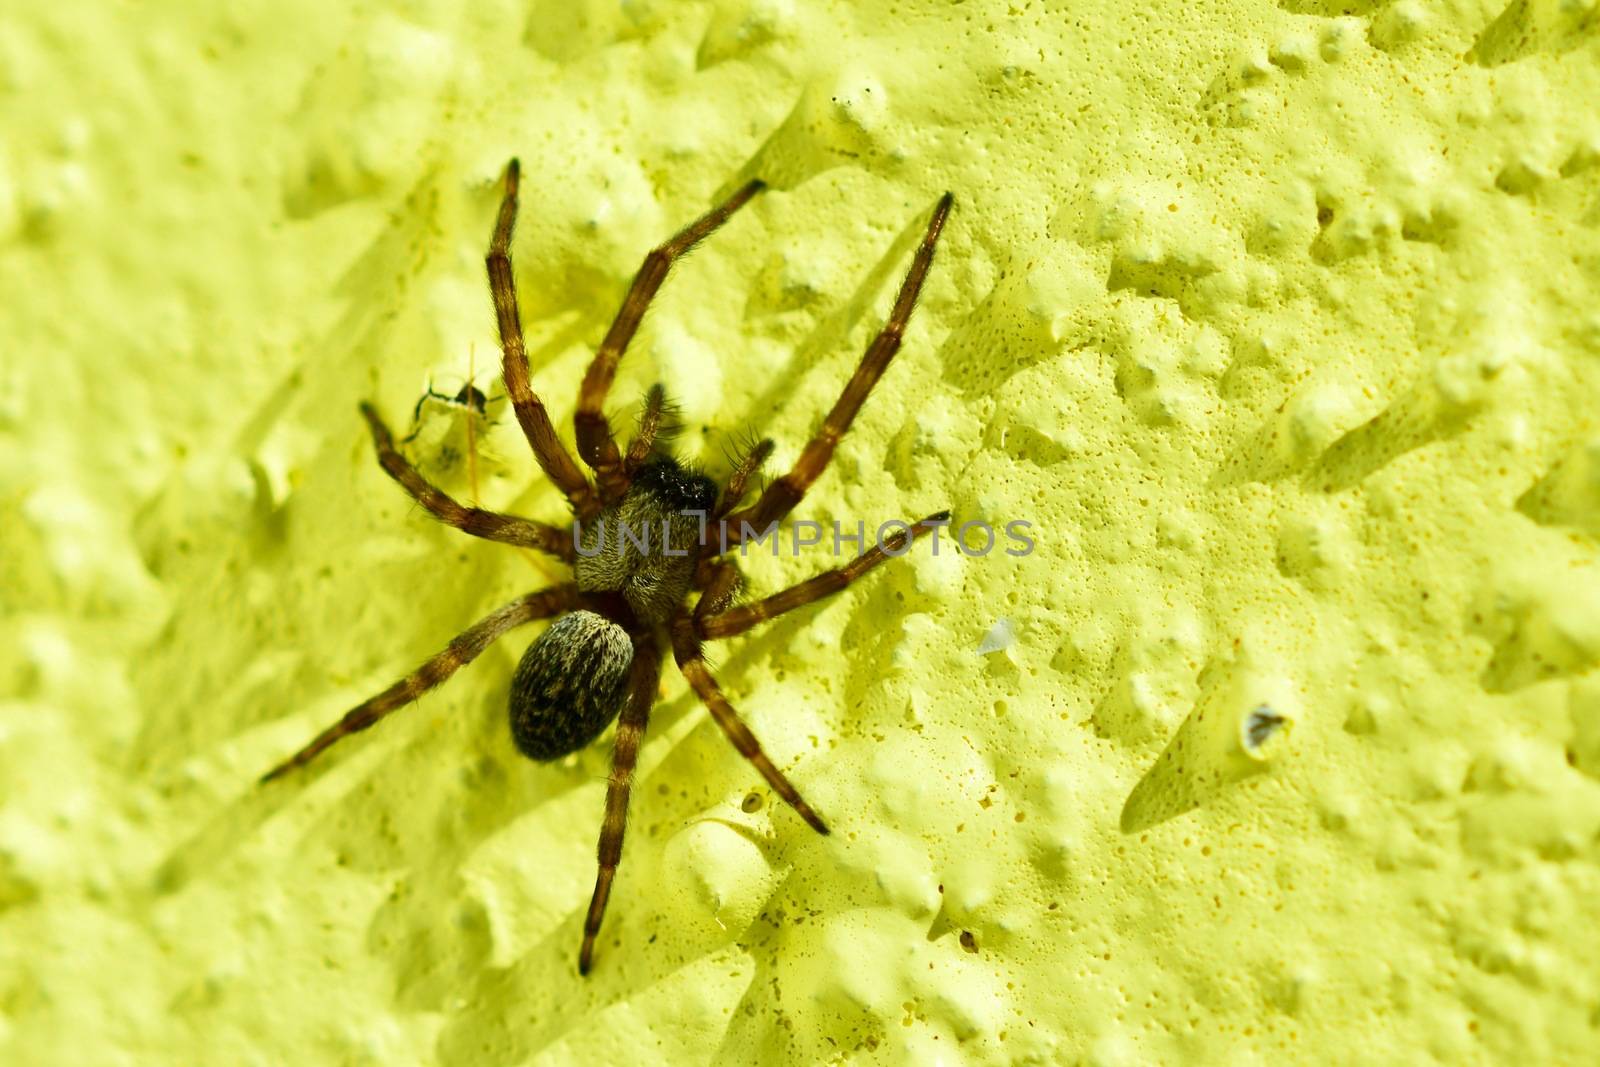 Macro of a Common house spider (Parasteatoda tepidariorum). The name house spider is a generic term for different spiders commonly found around human dwellings by Marshalkina